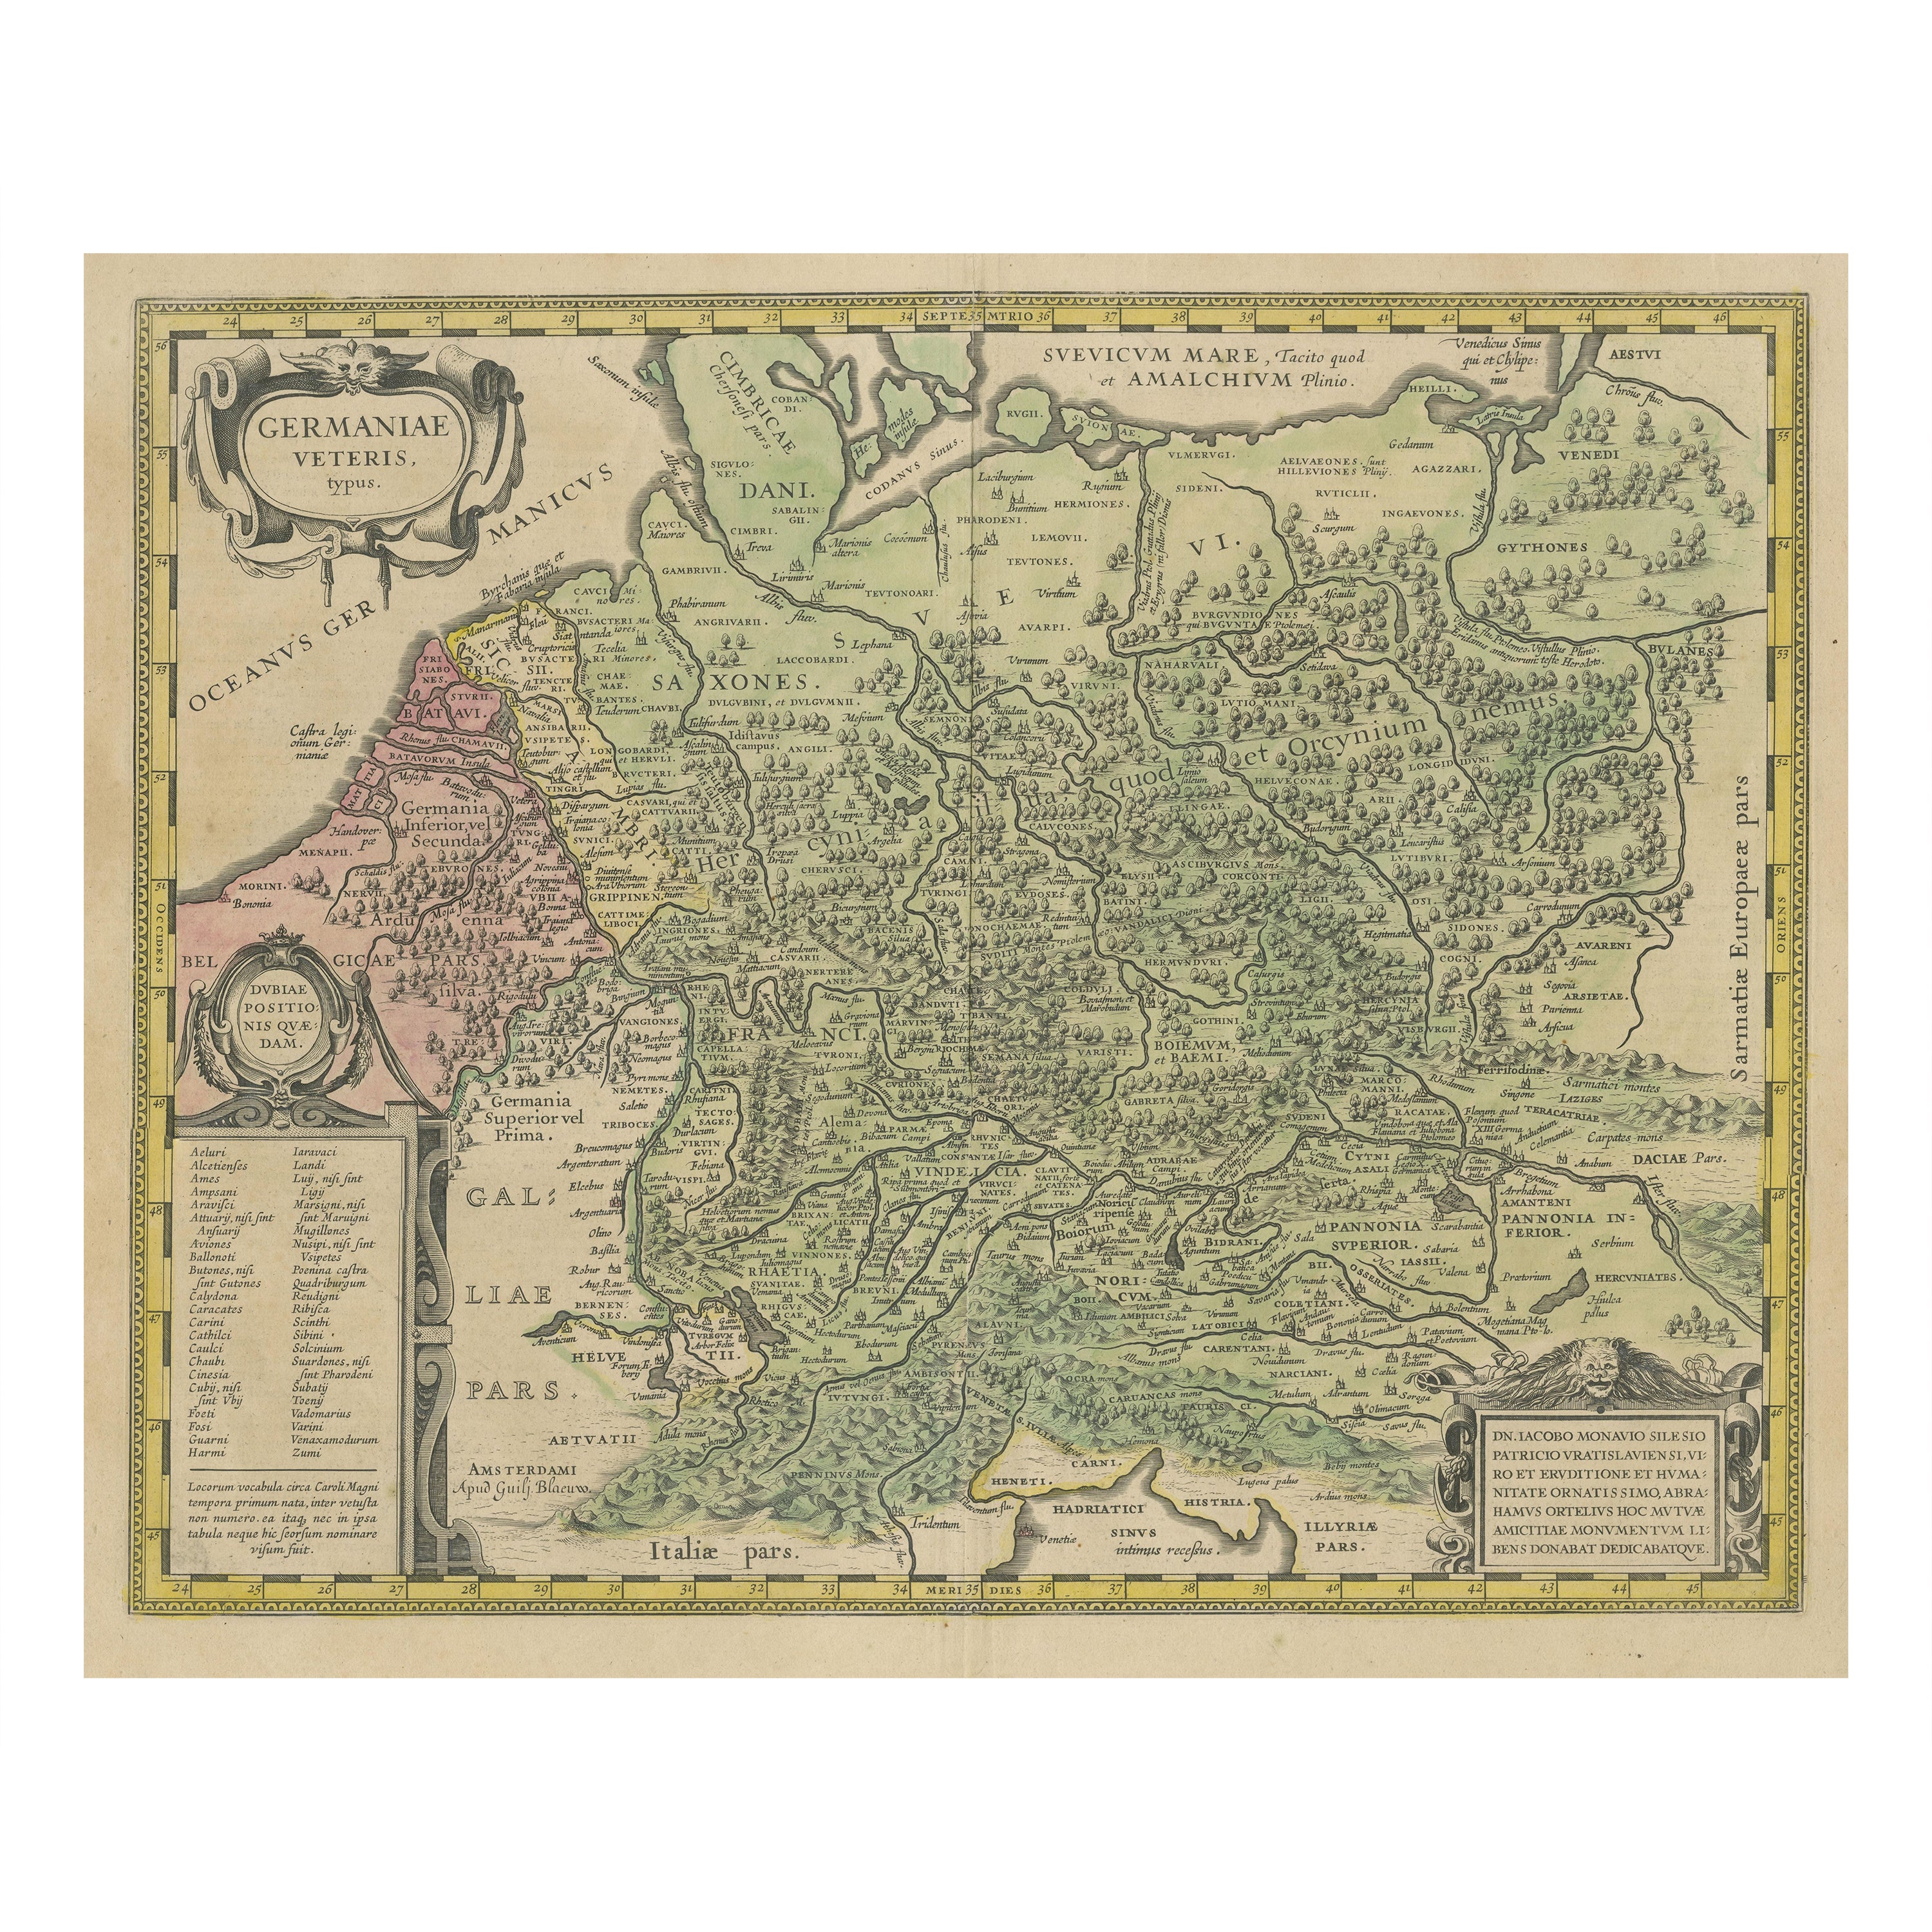 Original Hand-Colored Antique Map of Ancient Germany, circa 1630